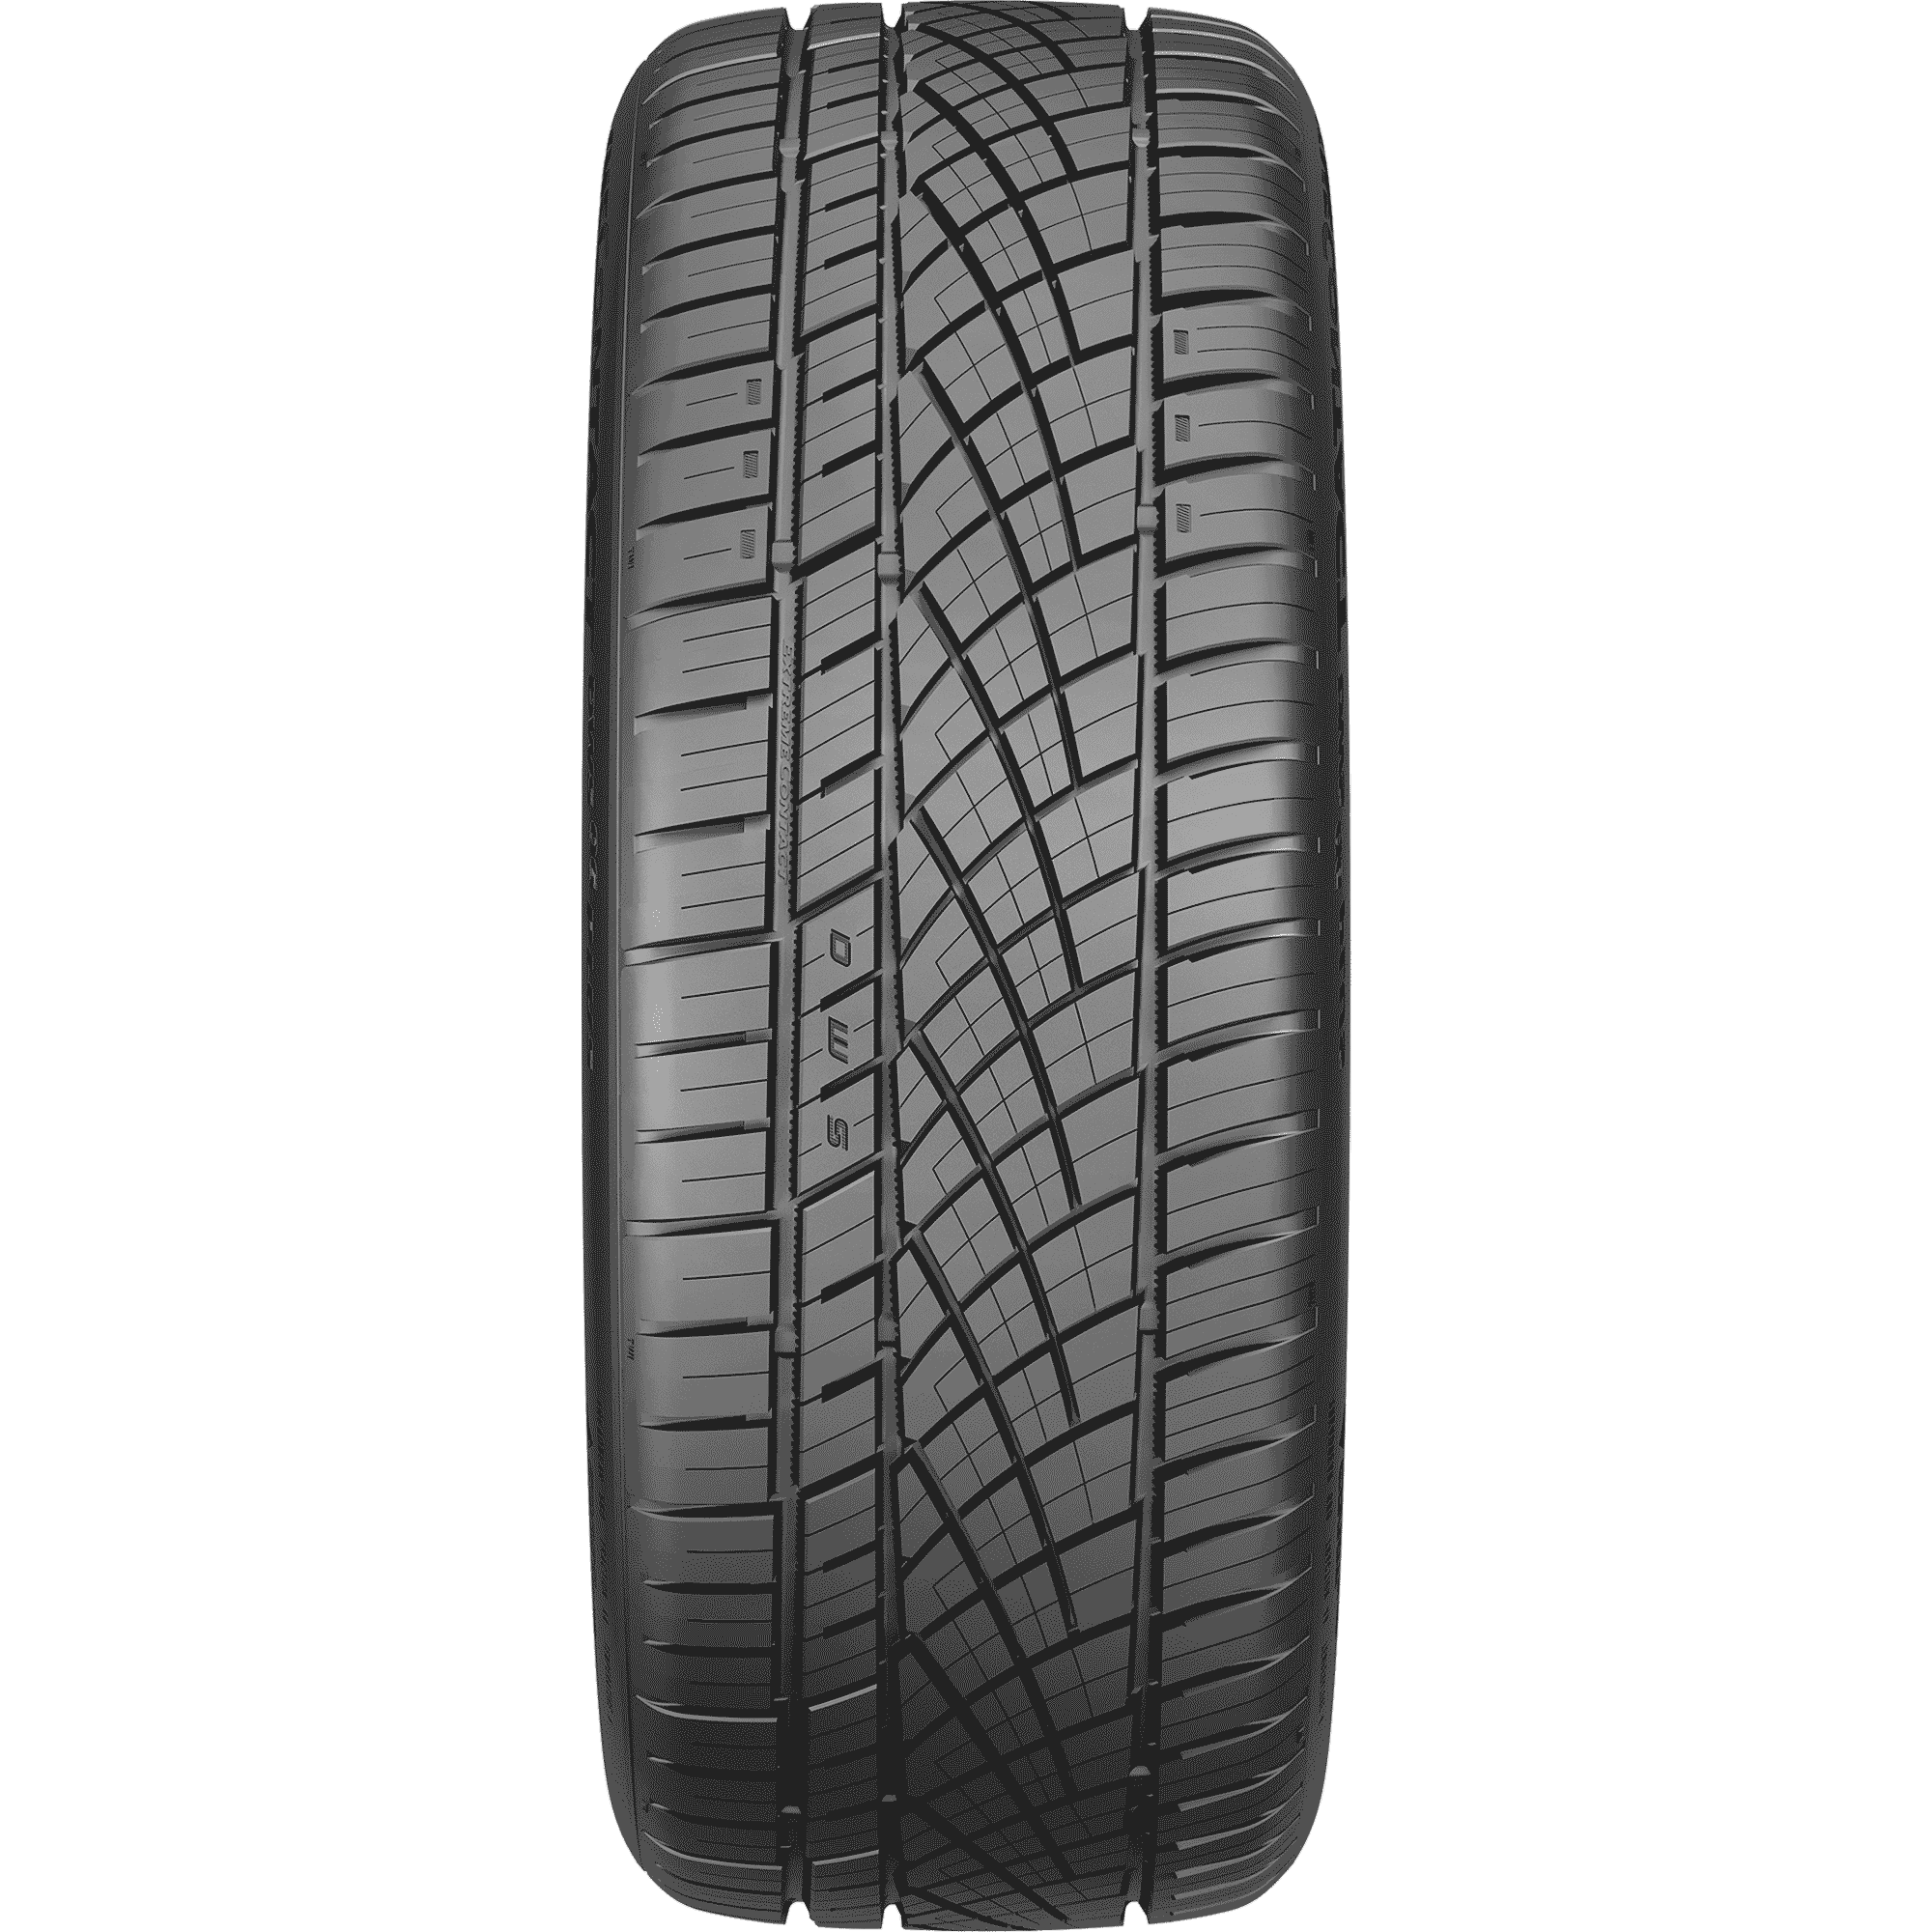 Buy Continental ExtremeContact DWS06 PLUS Tires Online SimpleTire